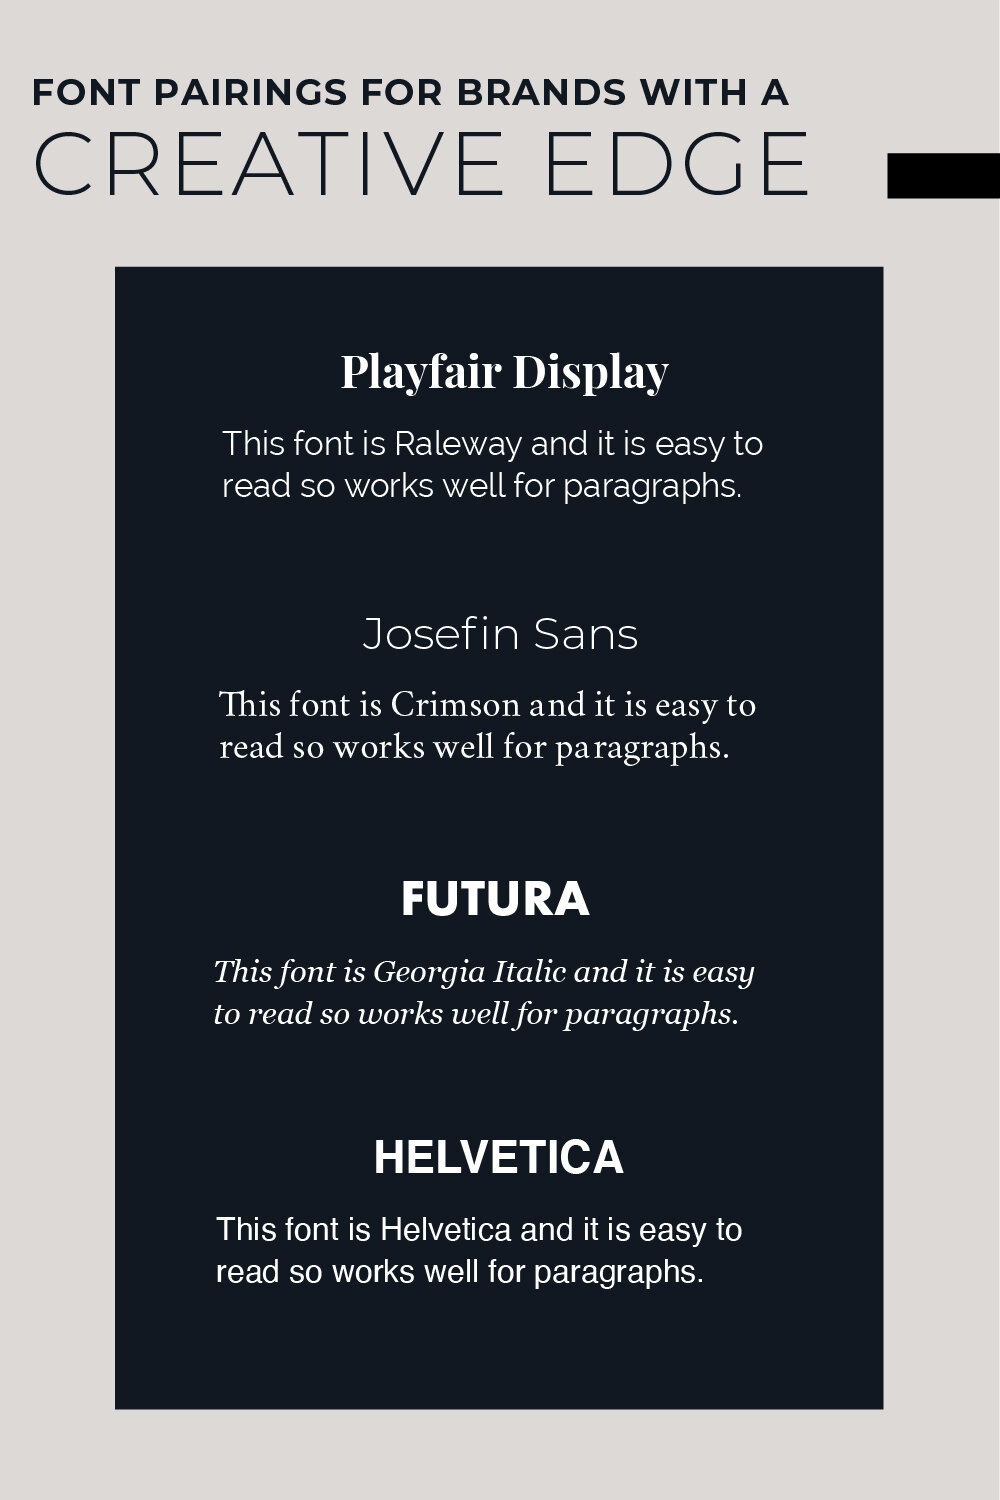 Font pairings for creative businesses